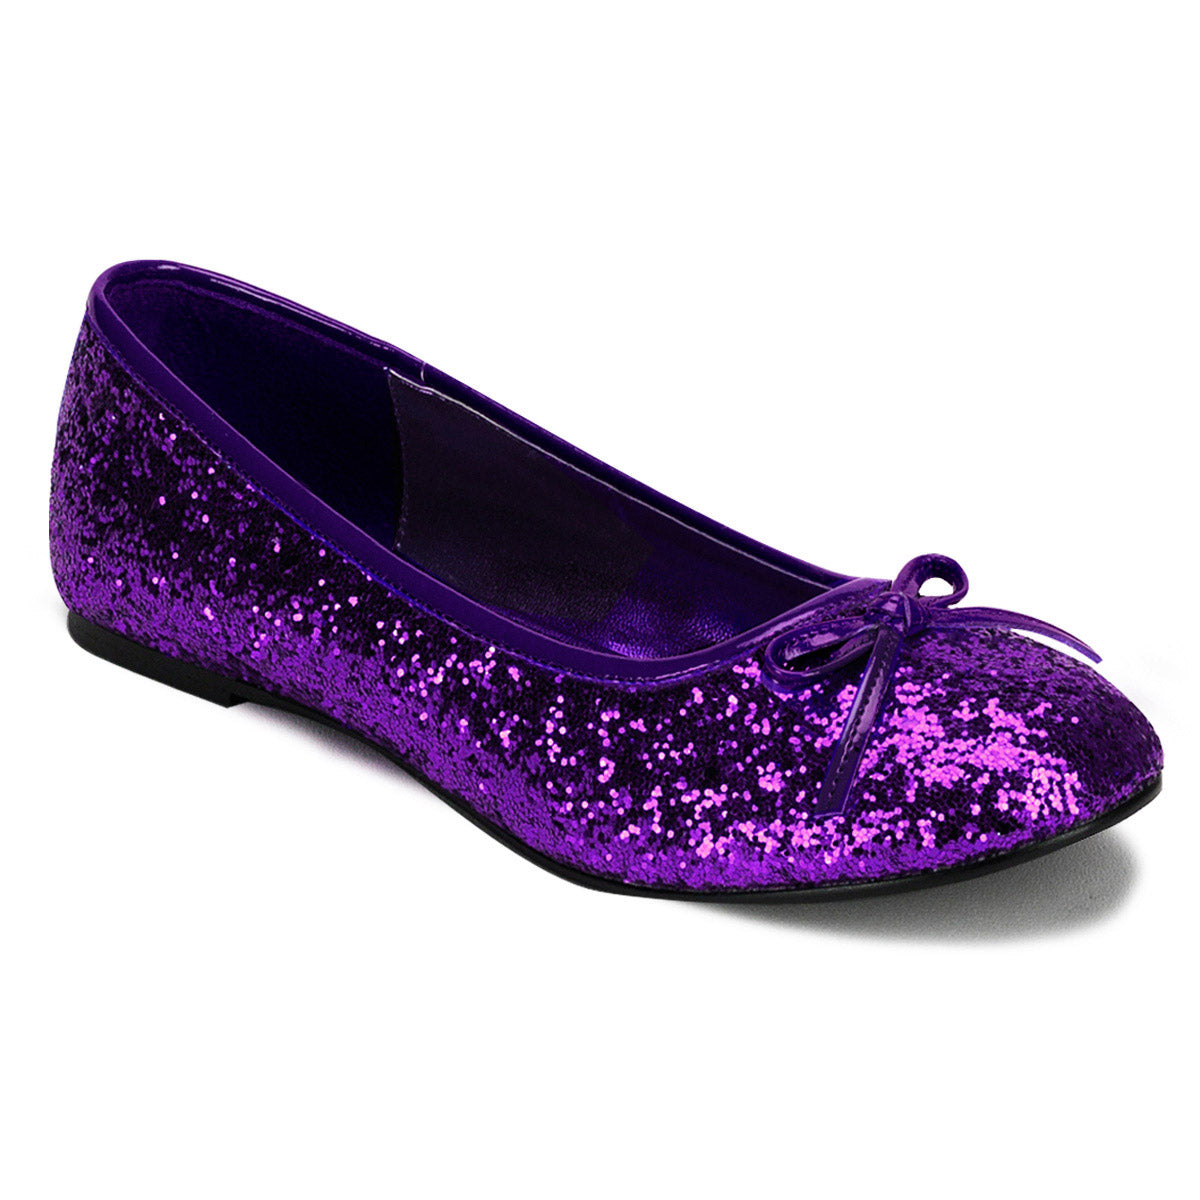 Classic Bow Accent Mary Jane Glitter Slip On Ballet Flats Shoes Pleaser Funtasma STAR/16G